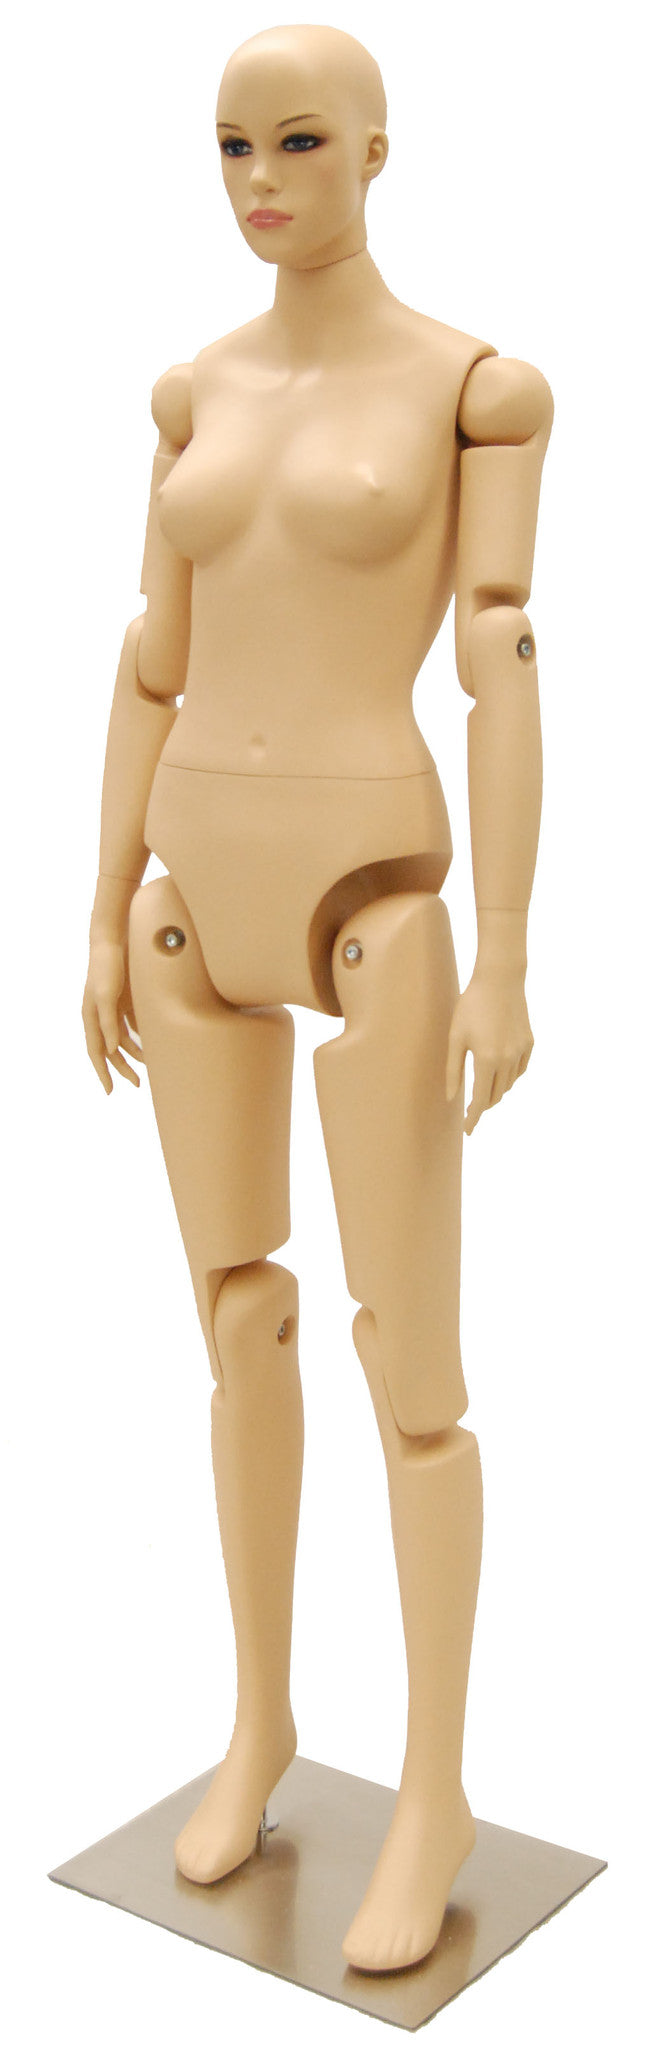 Articulated Realistic Female Mannequin 2 – Mannequin Madness